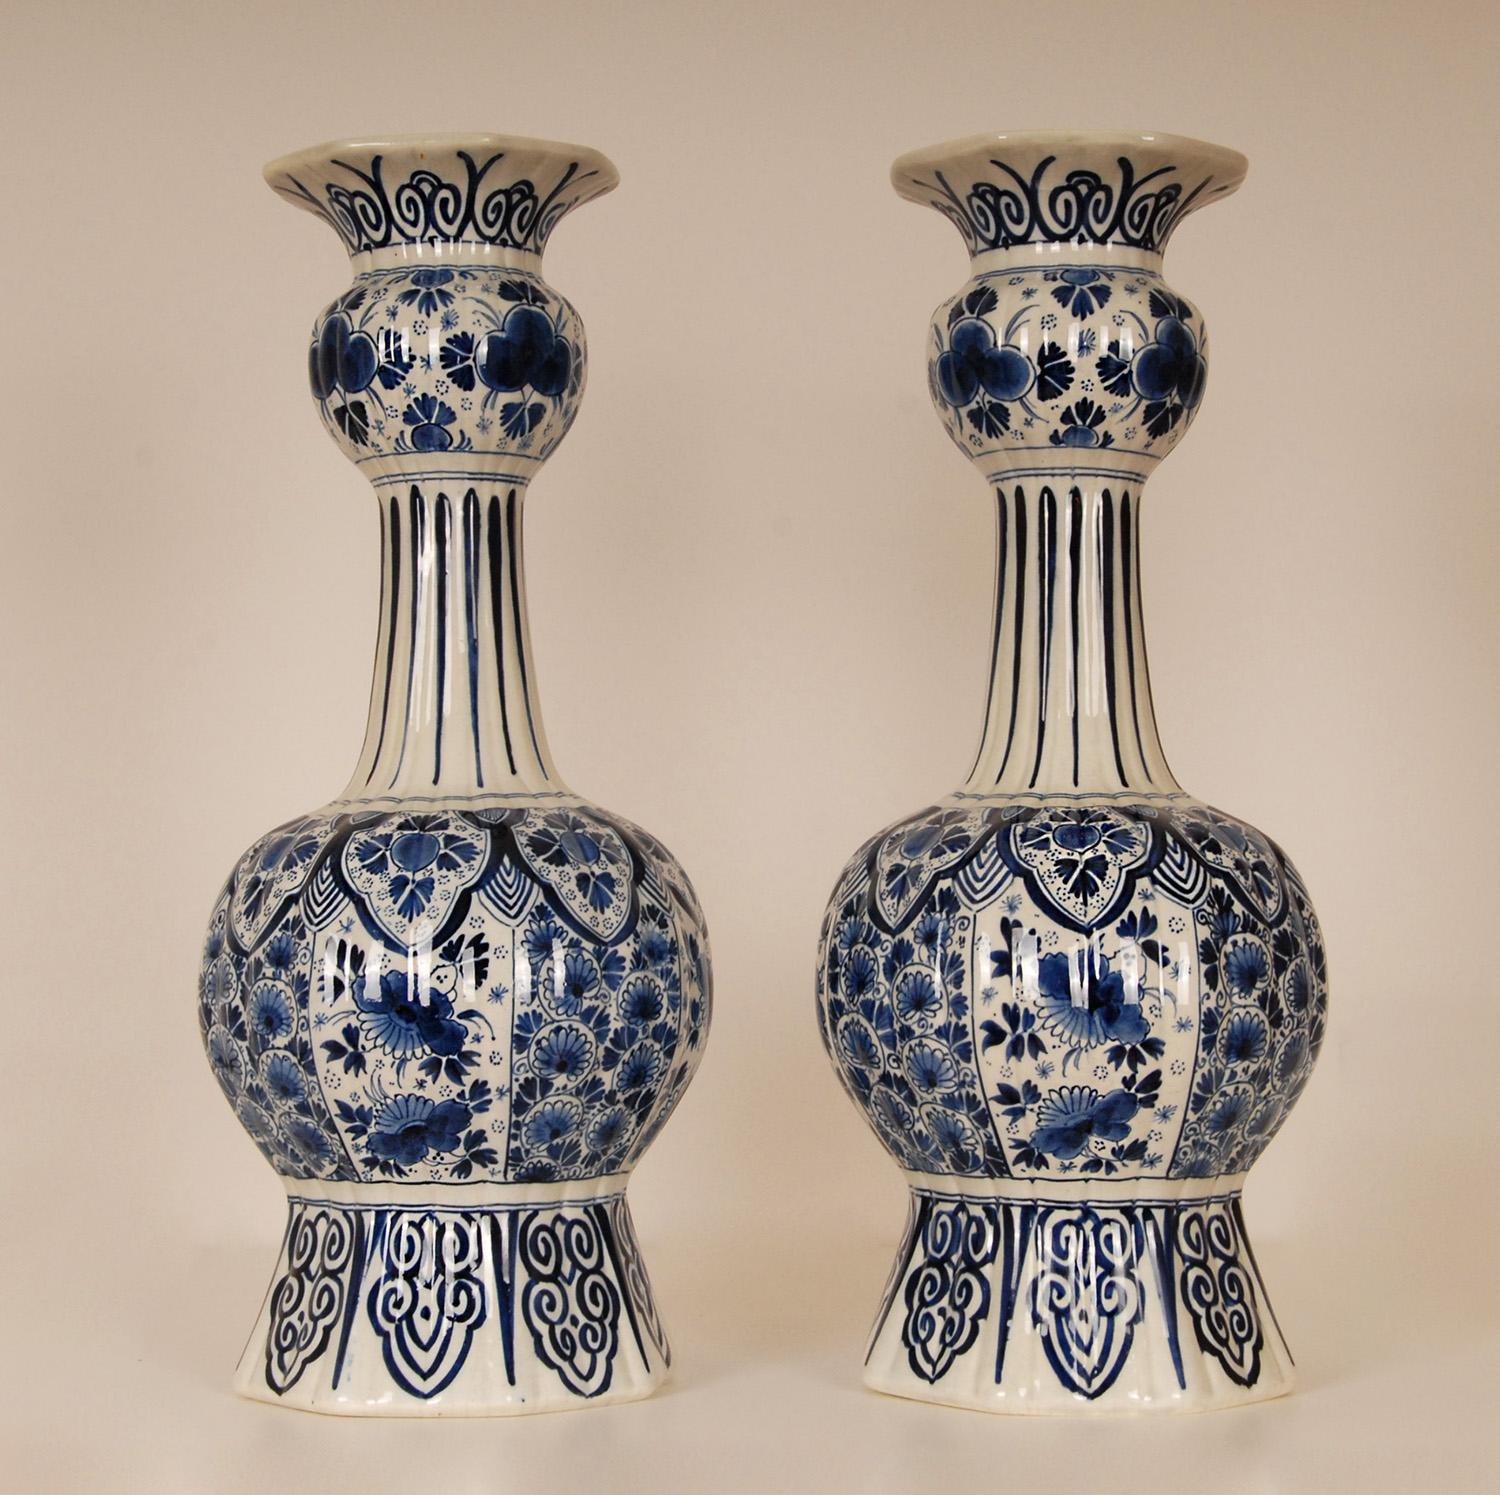 Hand-Crafted Antique Royal Delft Vases Chinoiserie Blue White Knobble Vases Earthenware pair For Sale